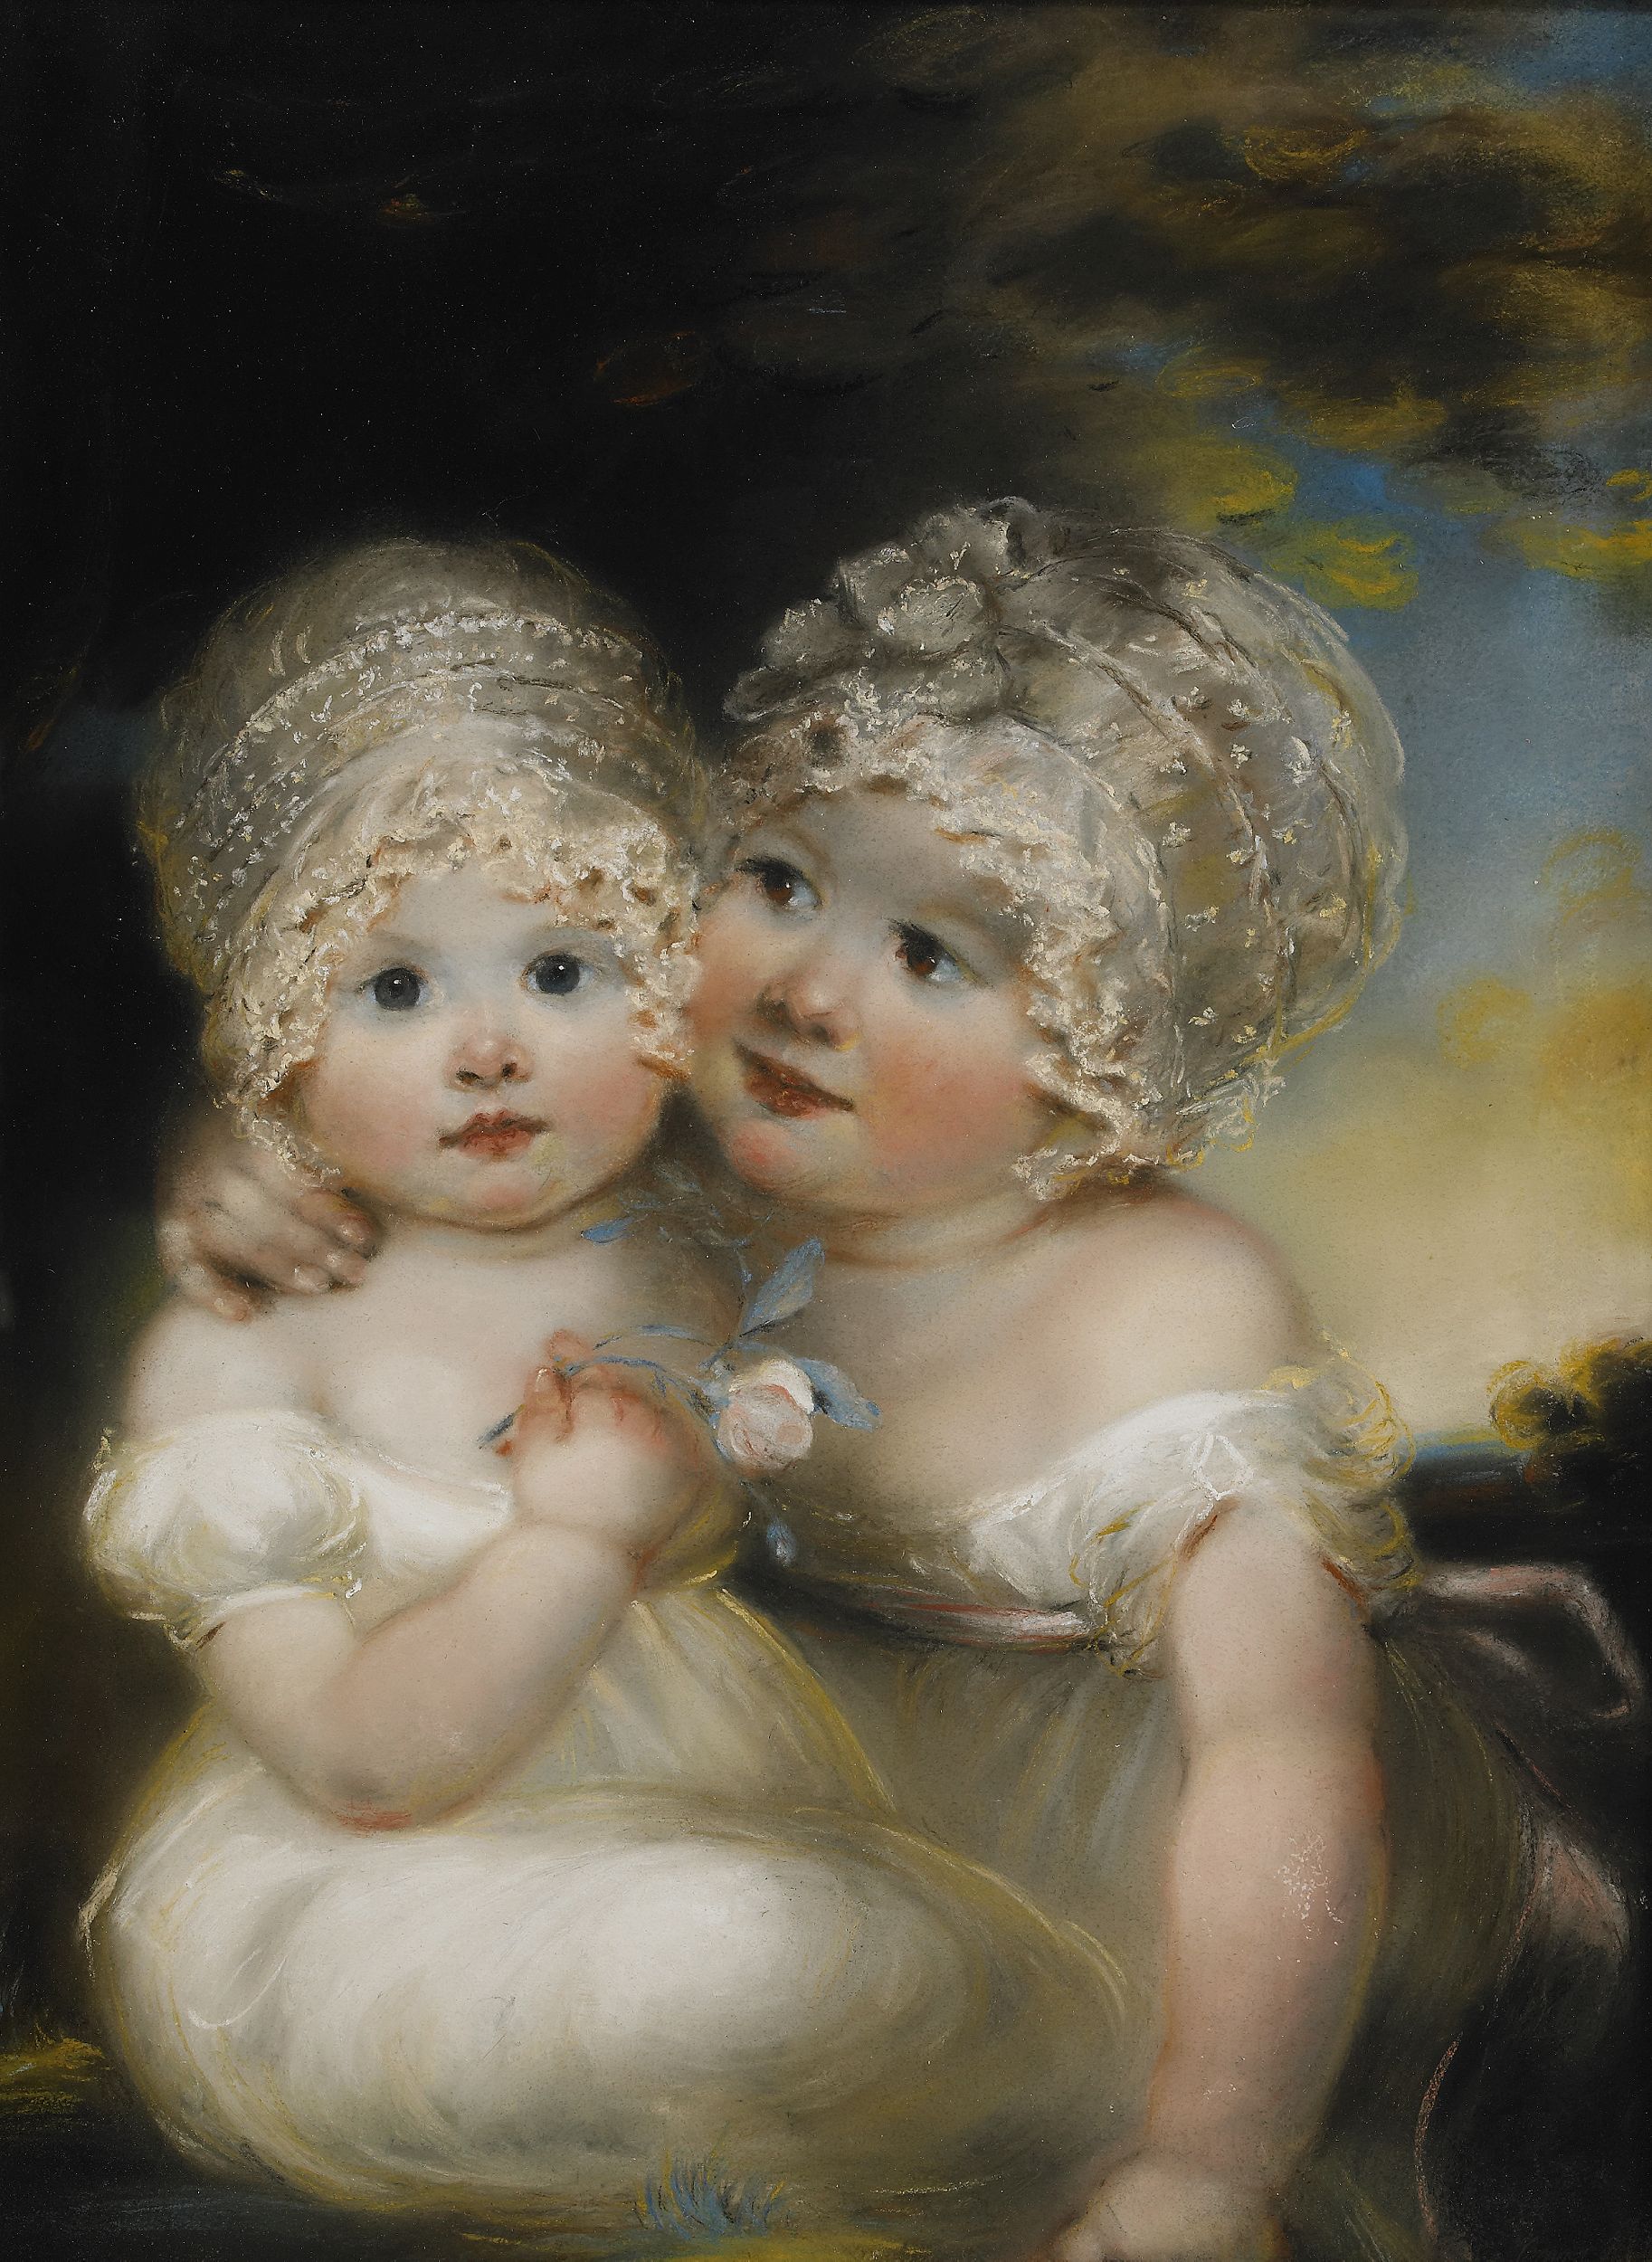 Russell Two small girls with bonnets